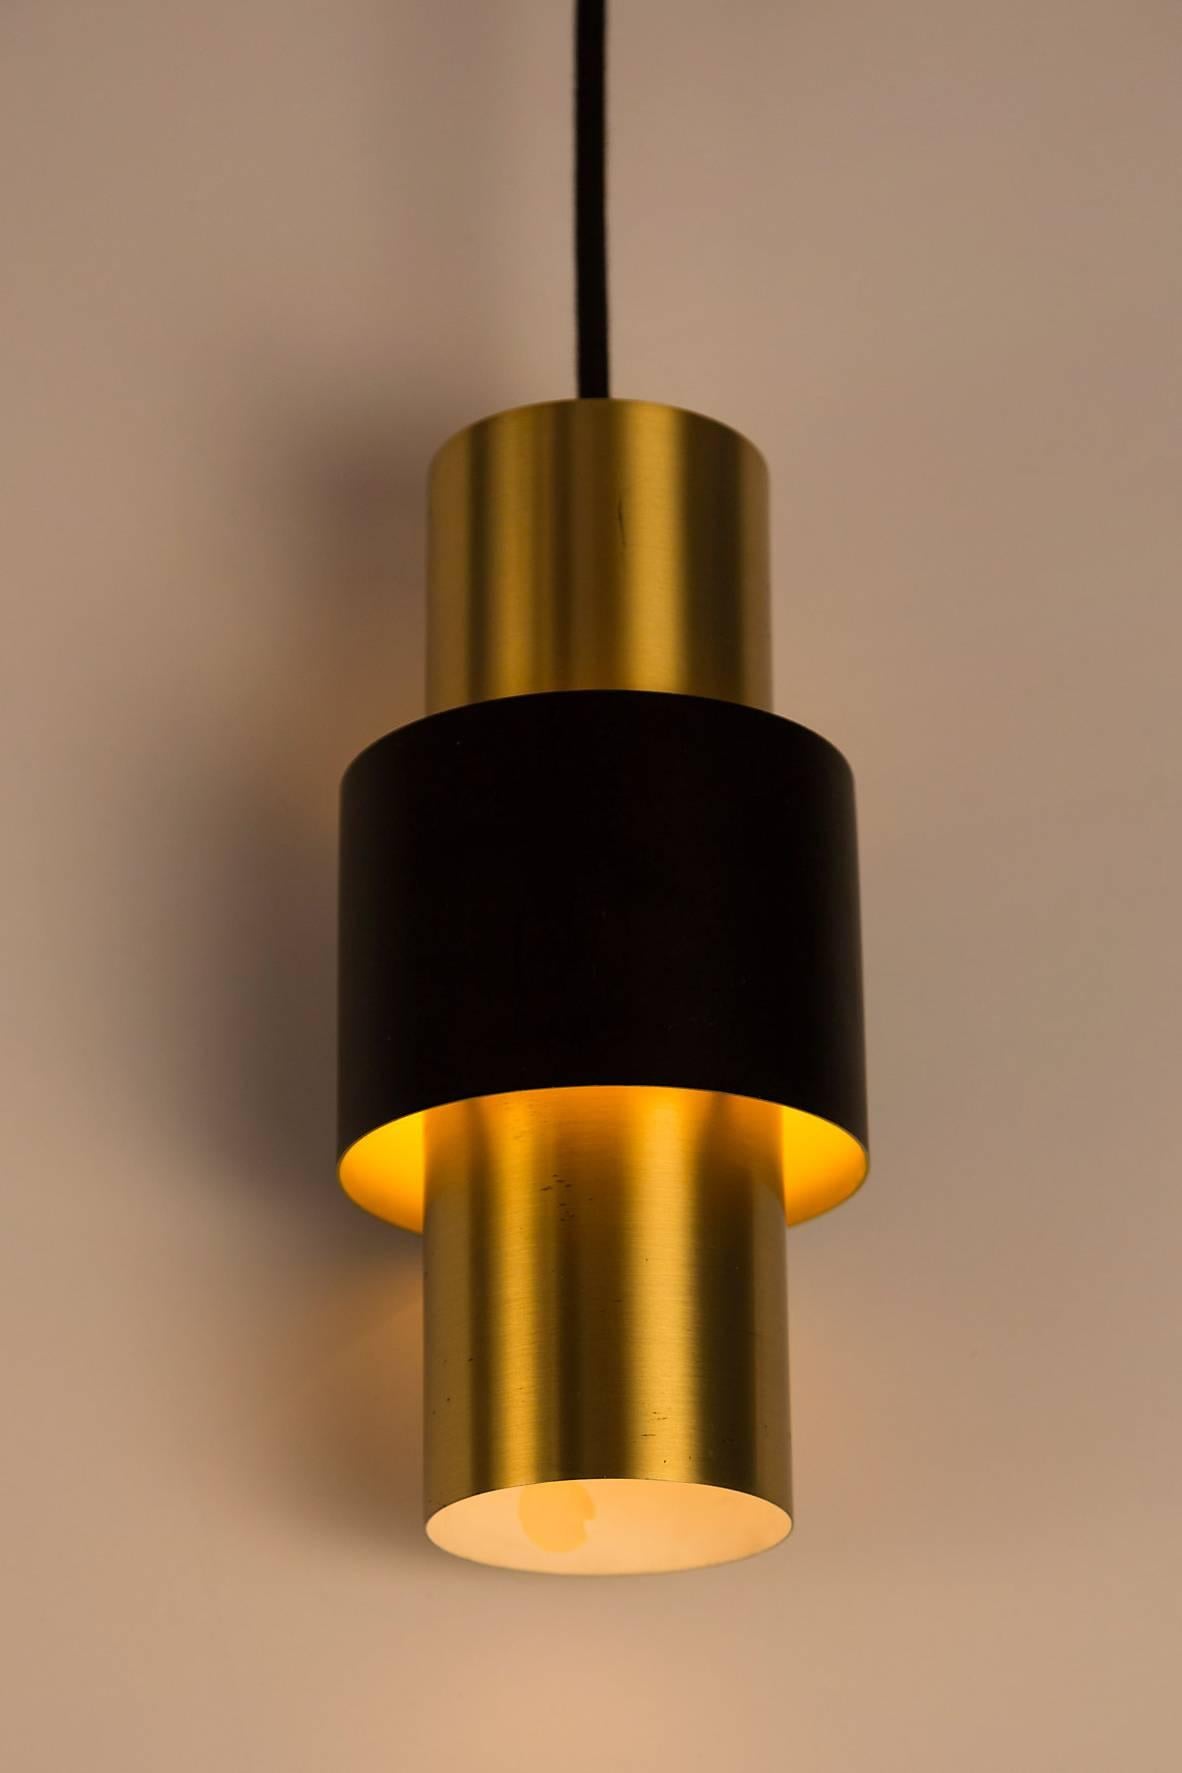 1950s Jo Hammerborg 'Saturn' pendants for Fog and Mørup. A Minimalist Danish modern design Classic executed in brass and black enameled metal.

Price is for the set of three.

Not UL listed, but recommended UL listing possible from authorized